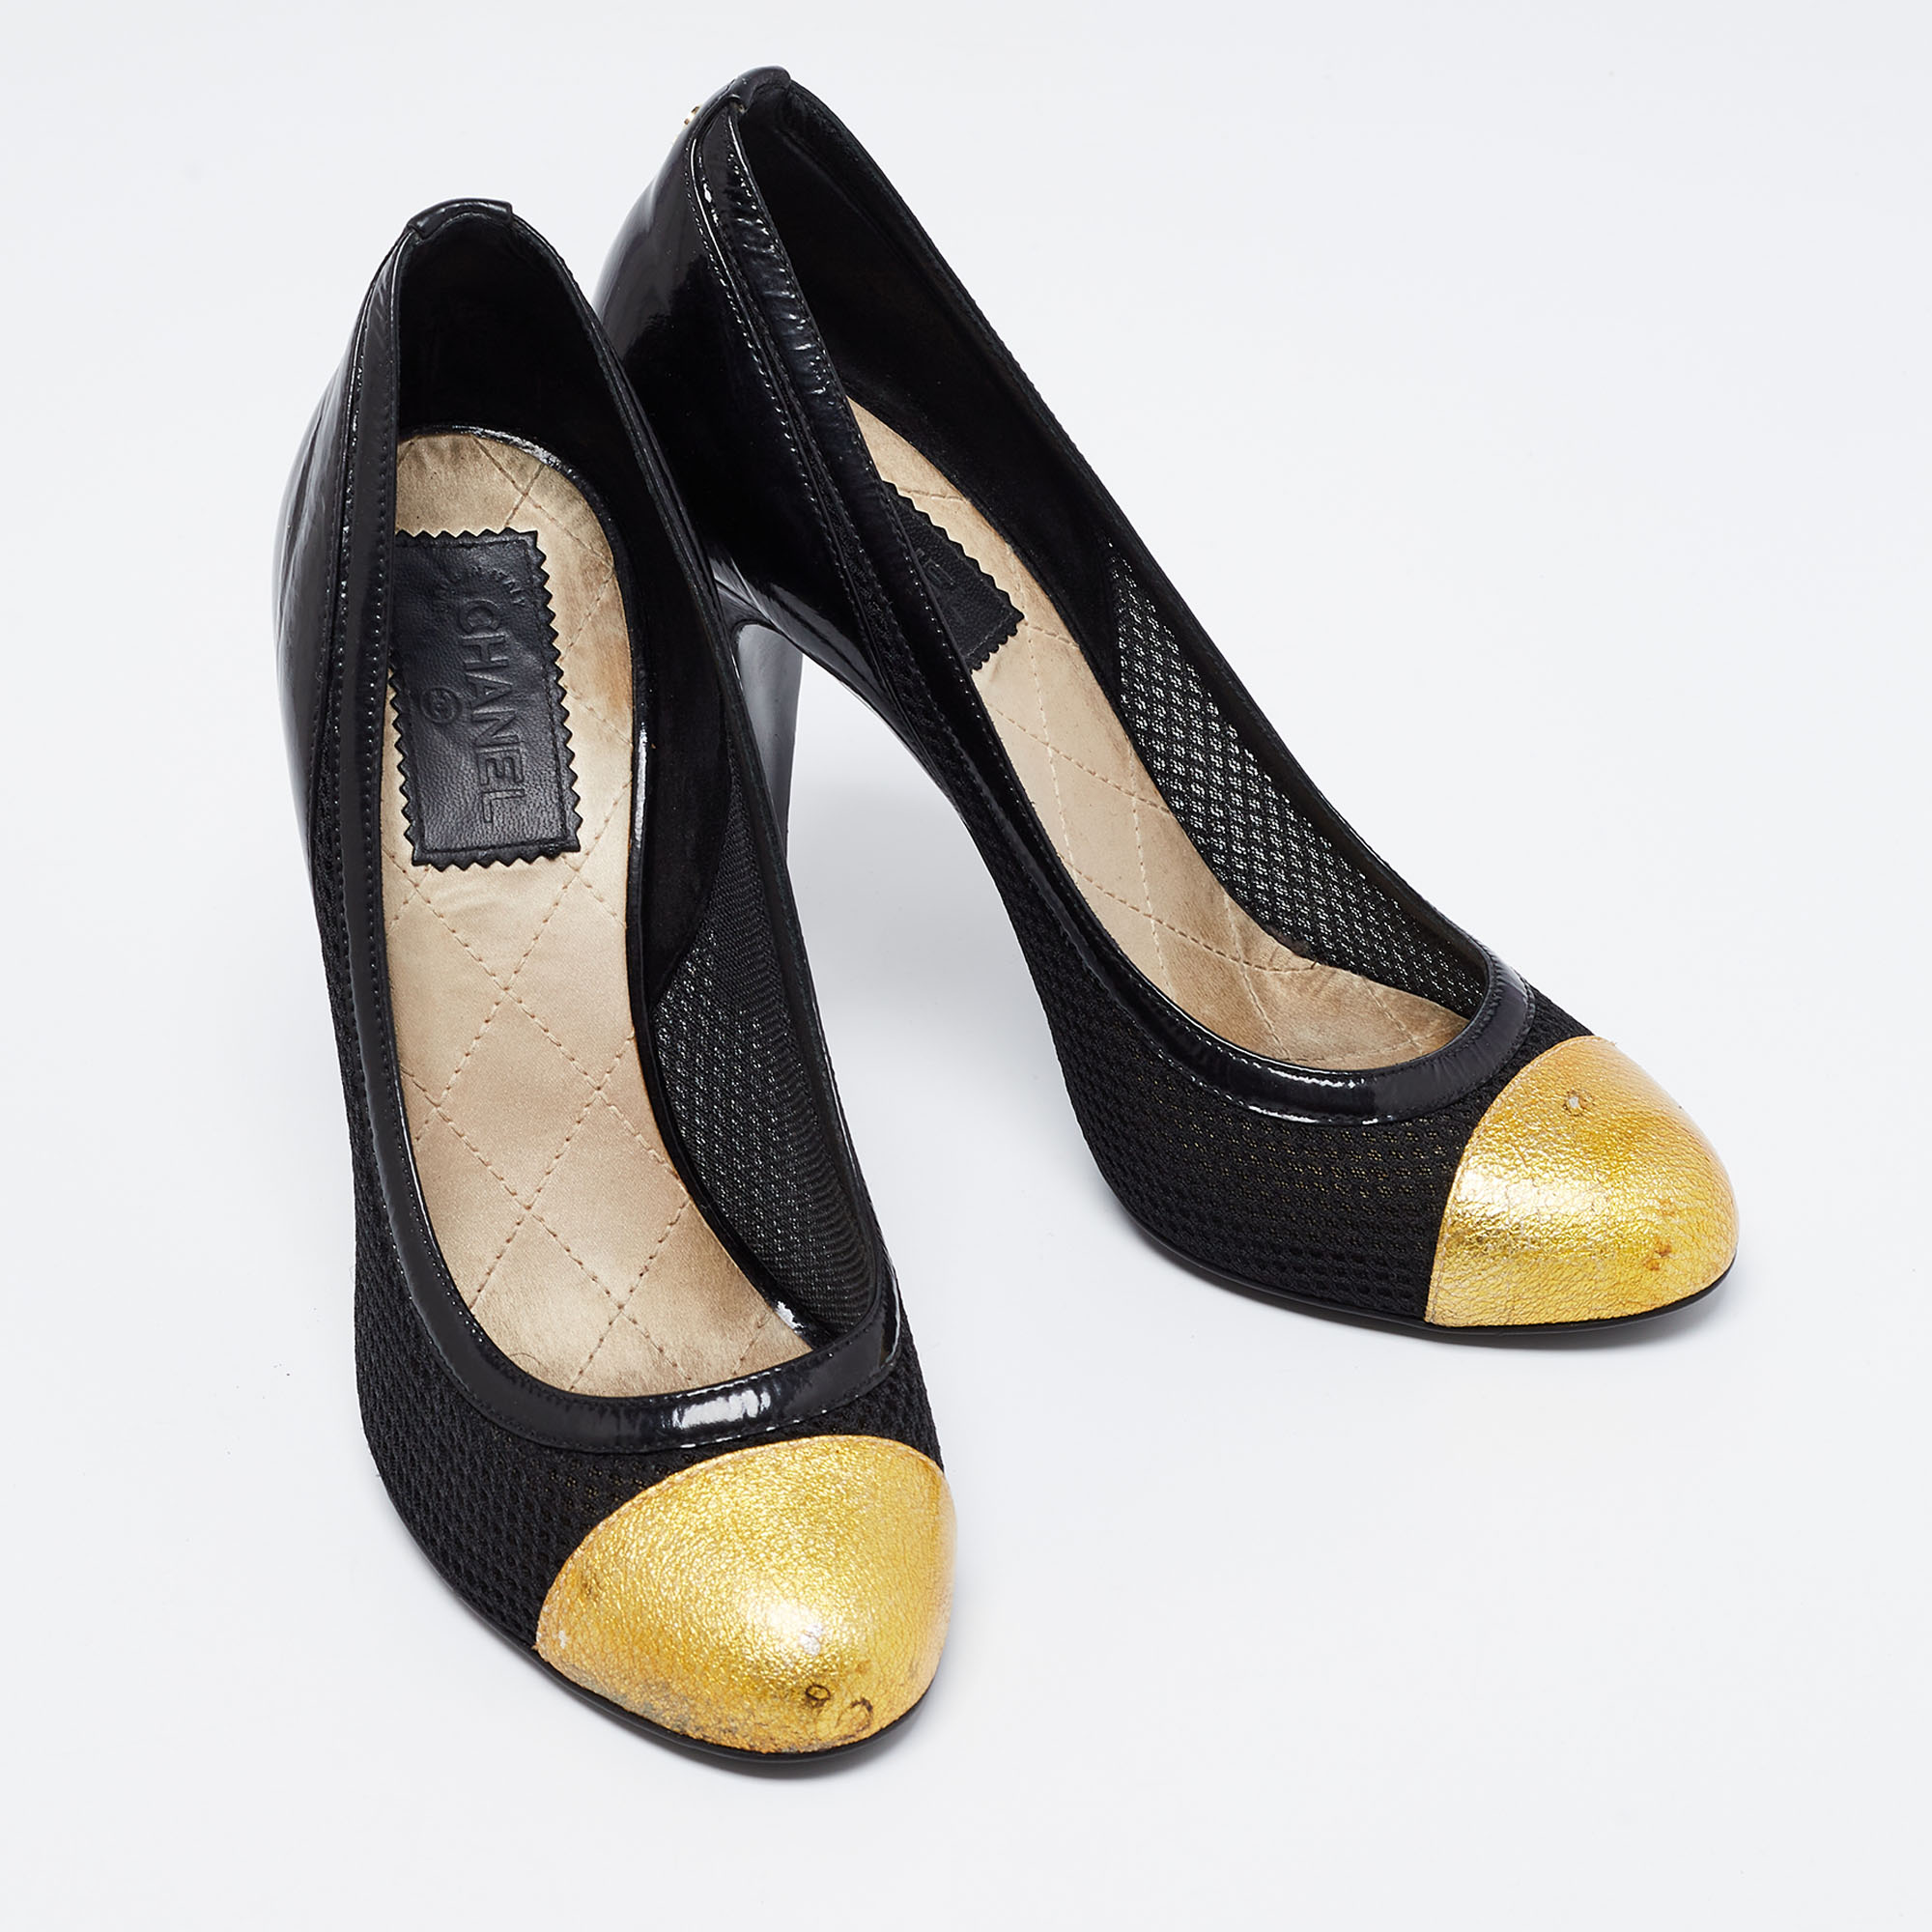 Chanel Black/Yellow Mesh, Patent And Textured Leather Cap-Toe Pumps Size 39